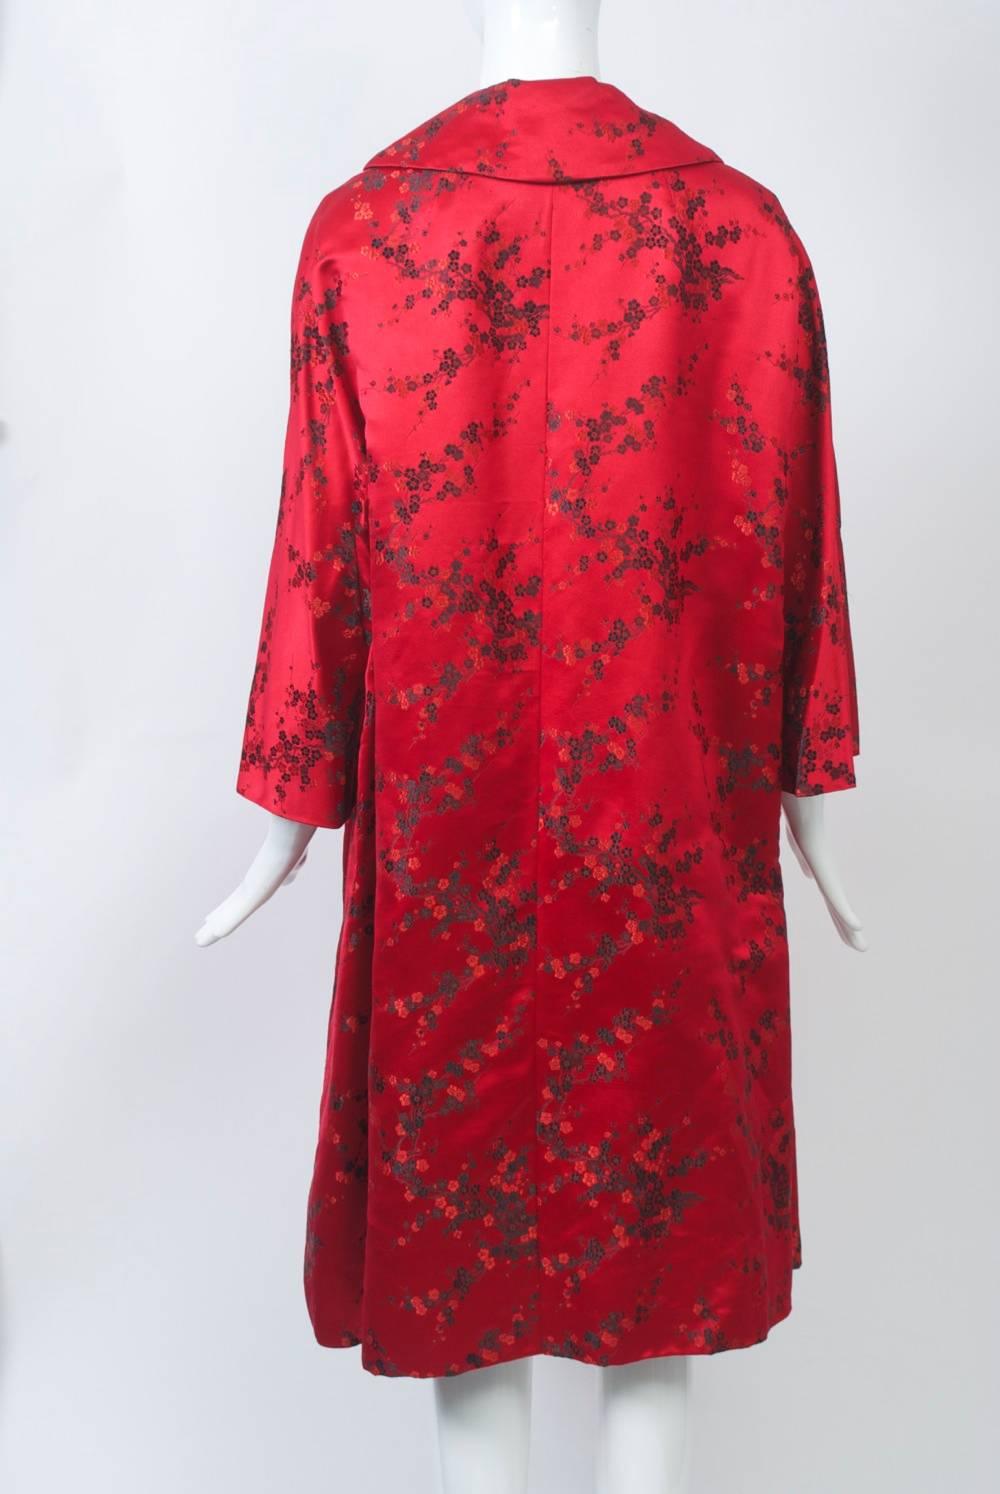 Red Brocade Hong Kong Coat In Excellent Condition For Sale In Alford, MA